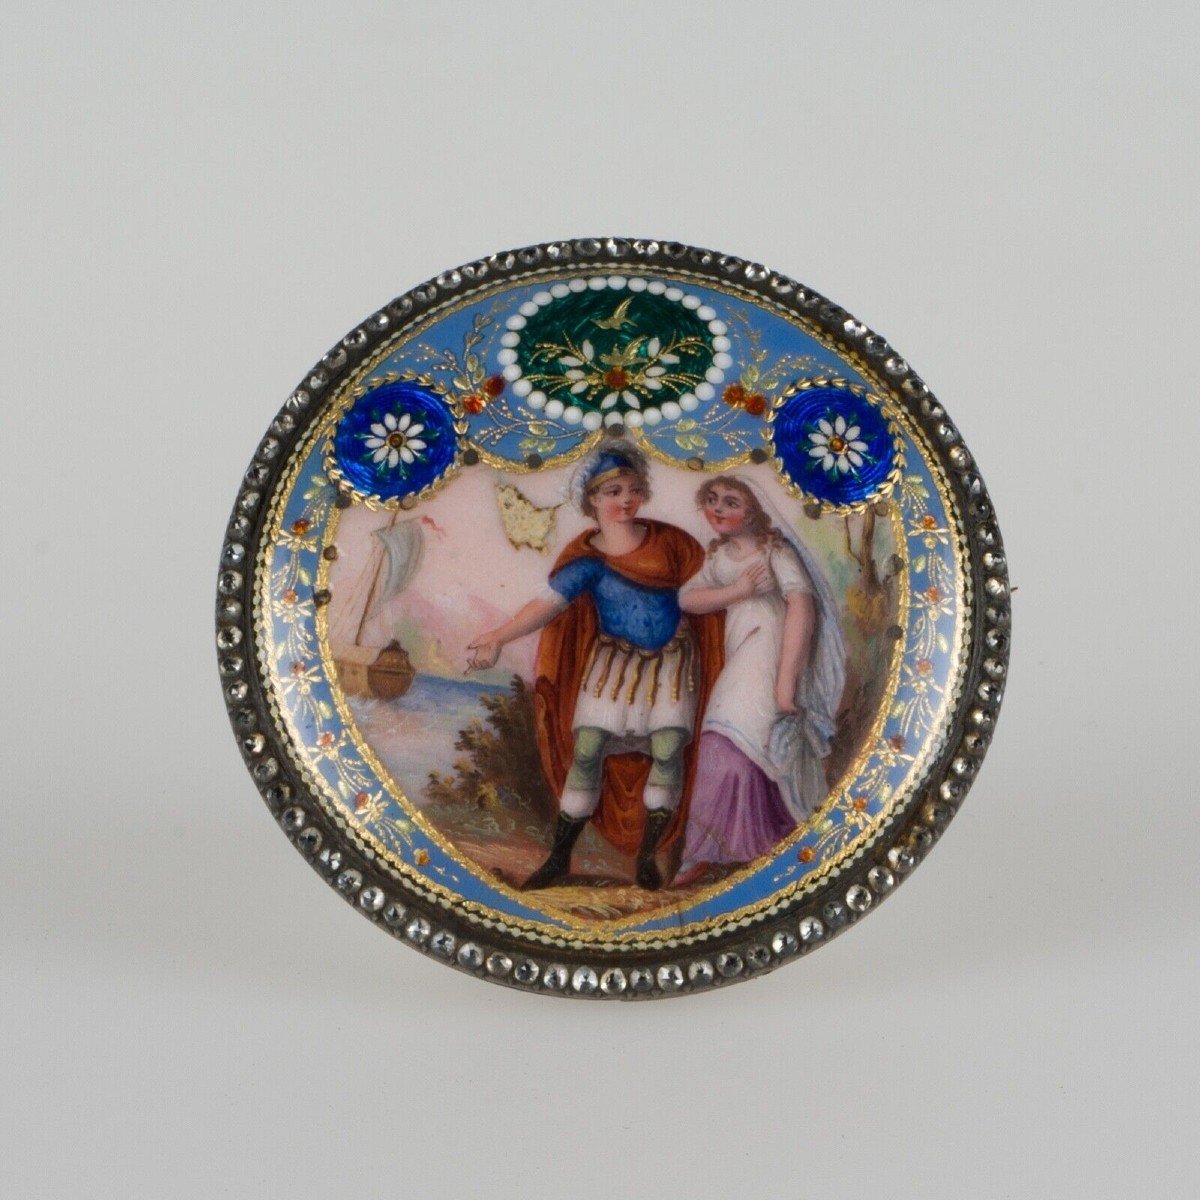 Late 18th Century Cold Enamel Brooch With Romantic Beading Decor